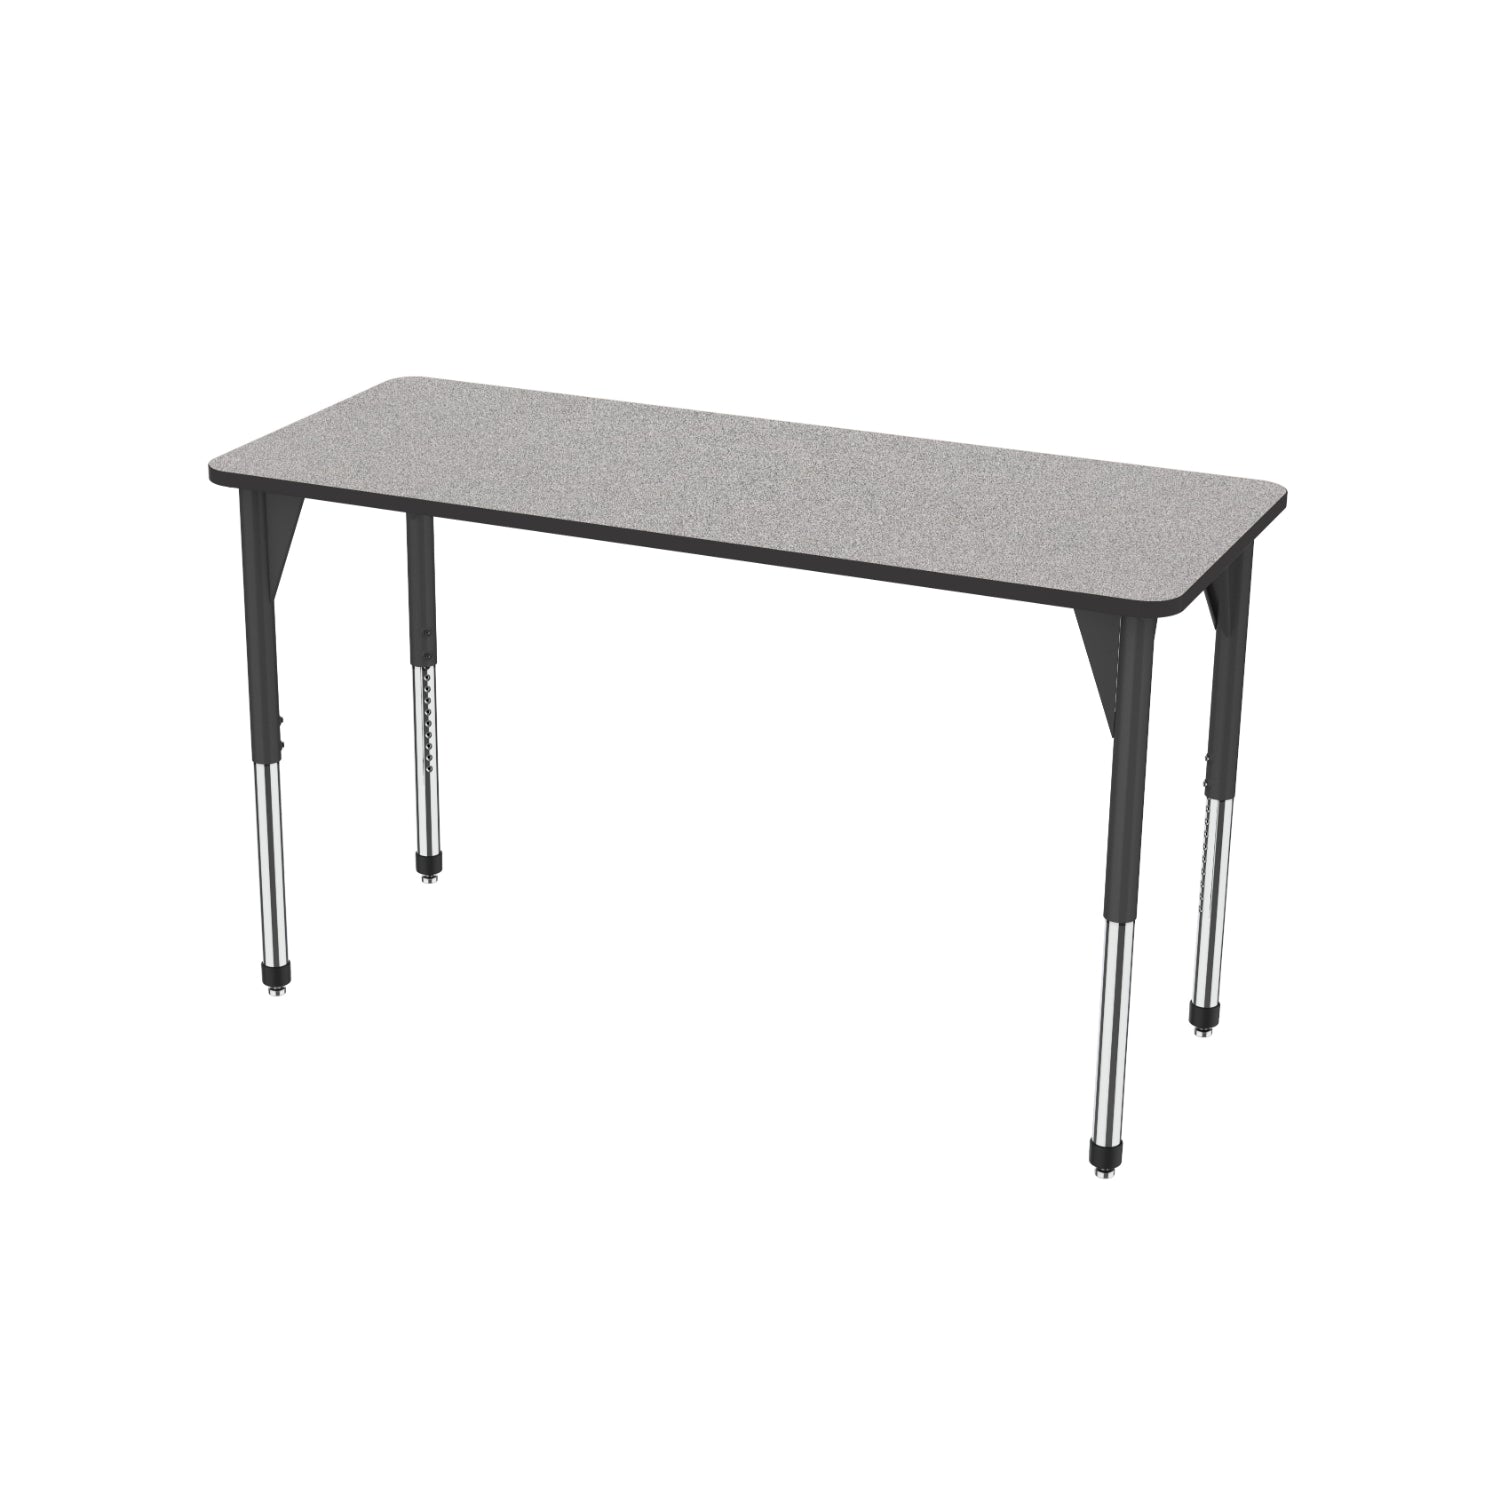 Premier Standing Height Collaborative Classroom Table, 30" x 72" Rectangle